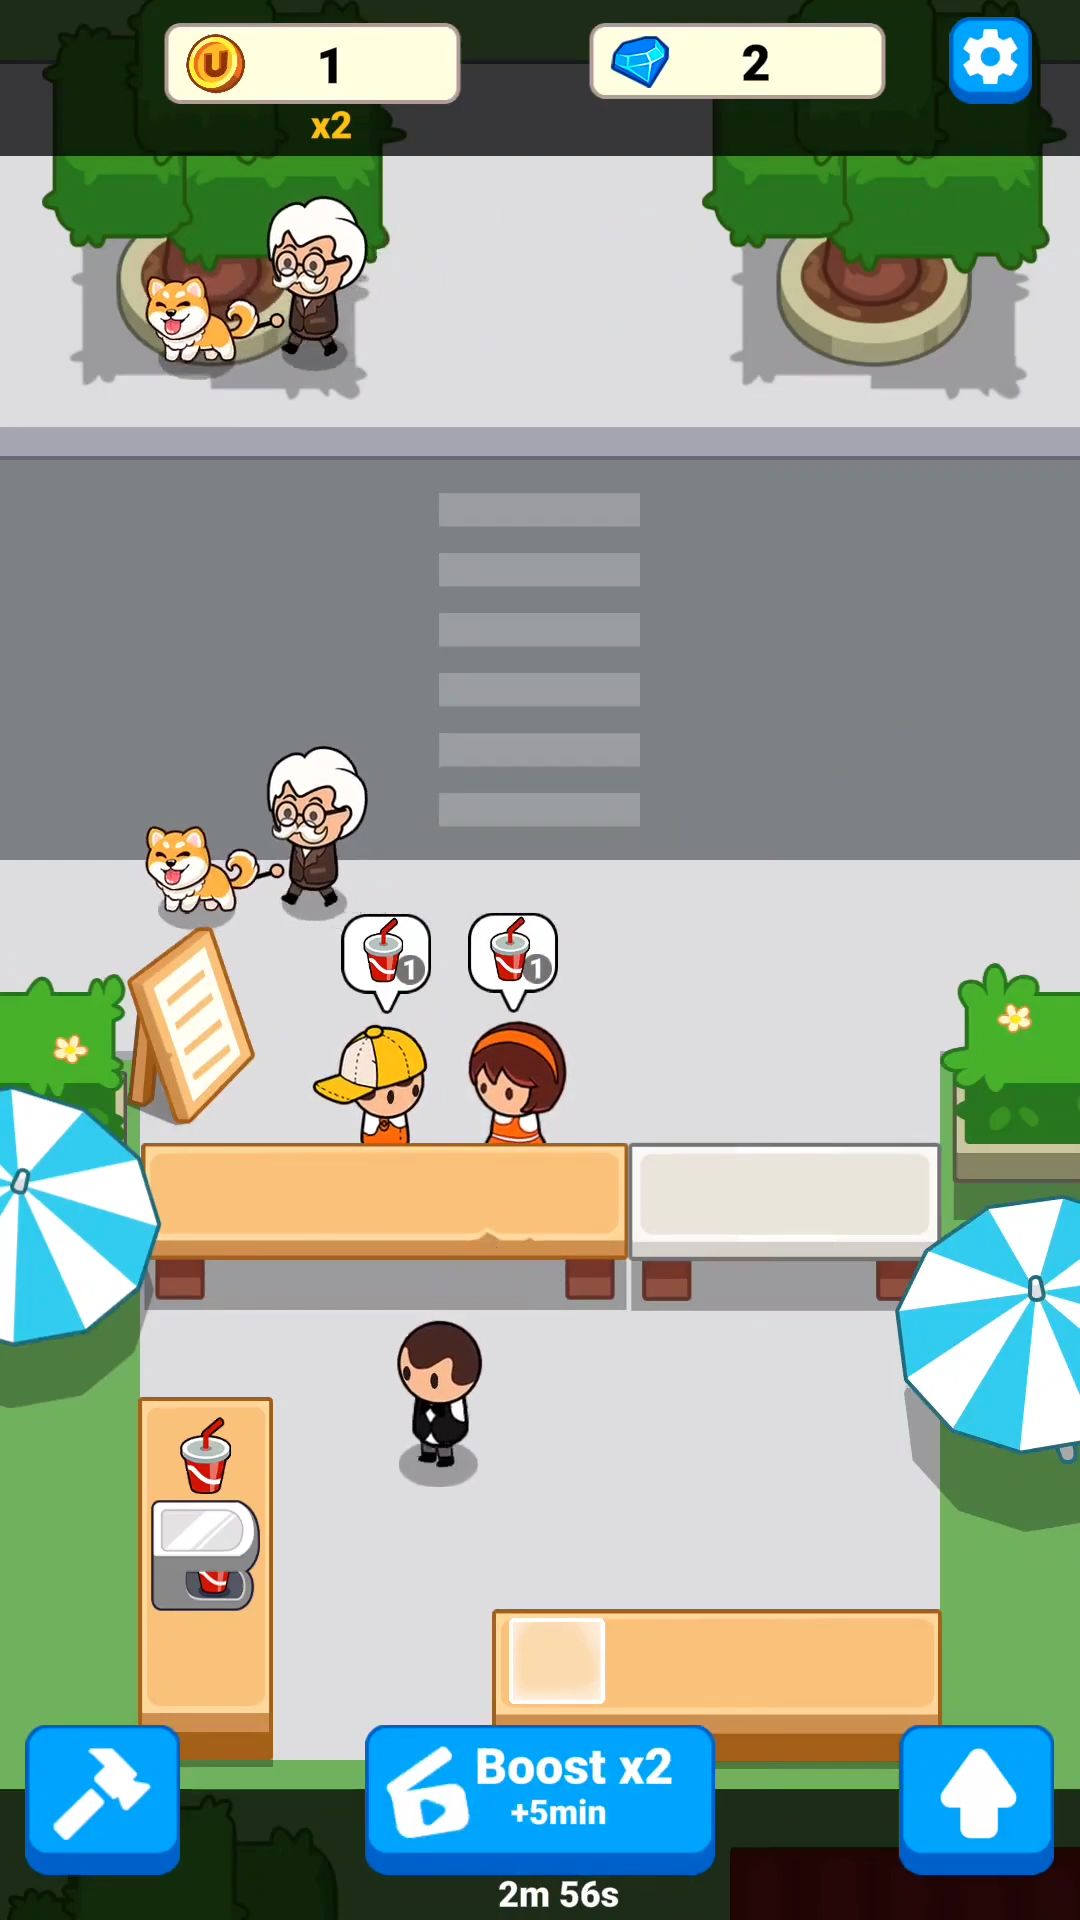 Gameplay of the Food Fever: Restaurant Tycoon for Android phone or tablet.